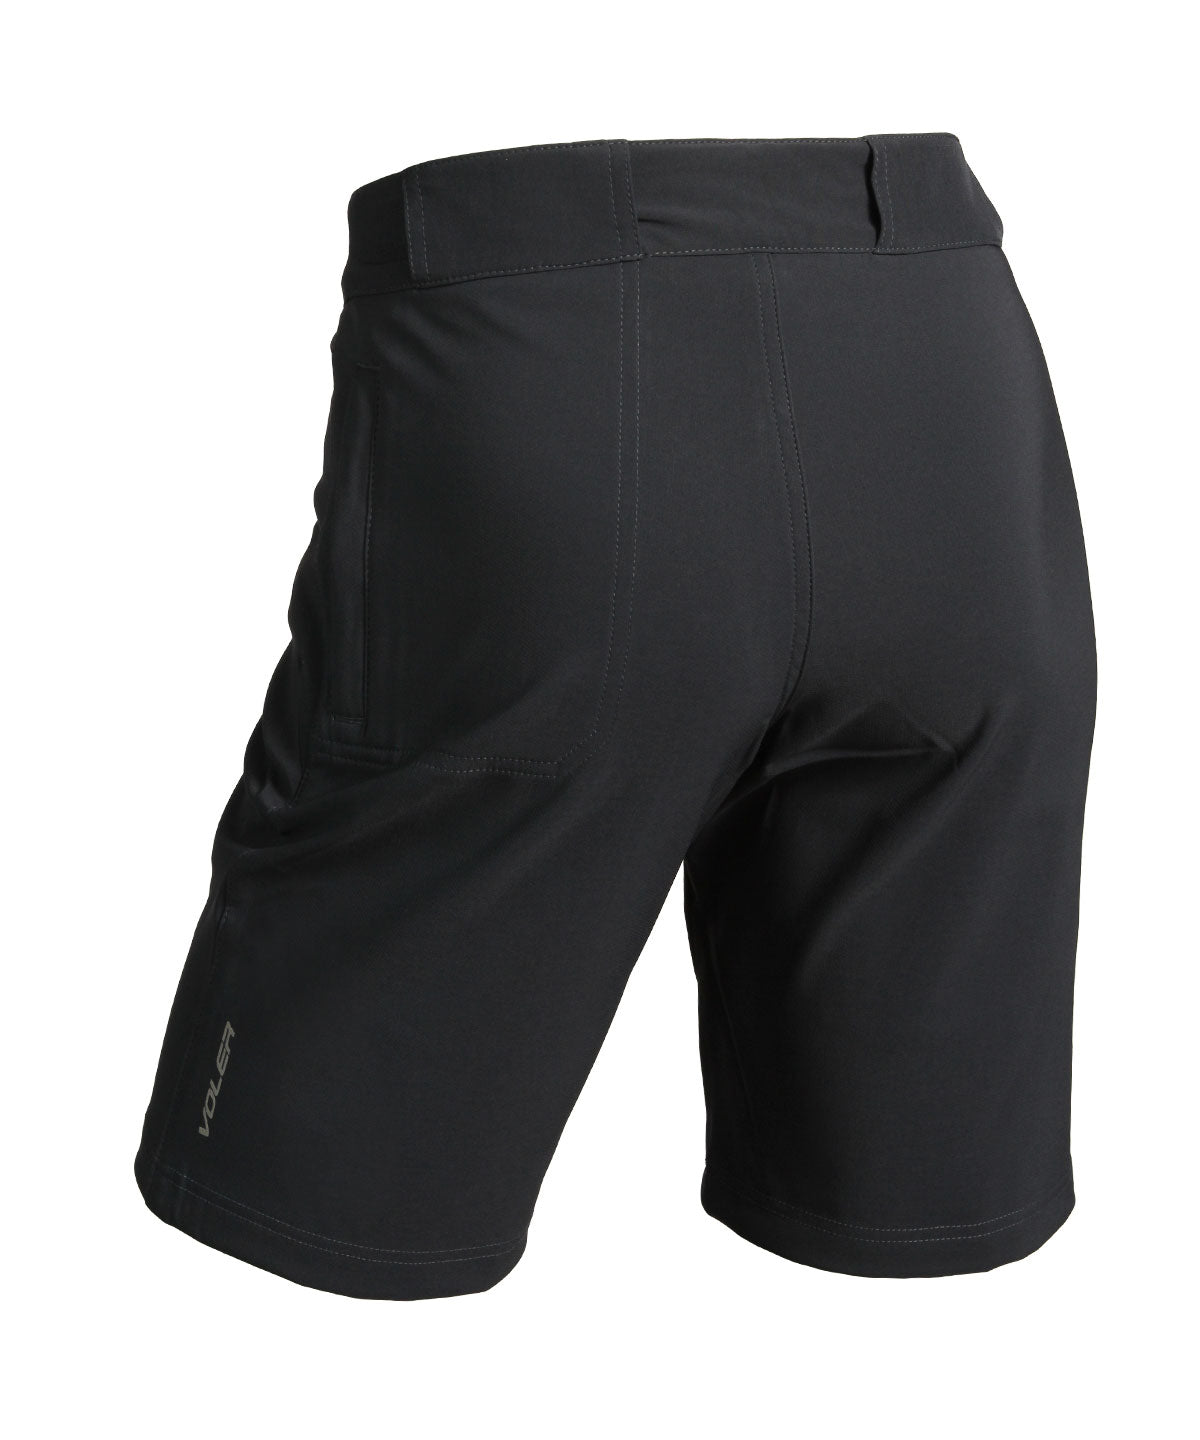 W'S ALL-MOUNTAIN SHORT